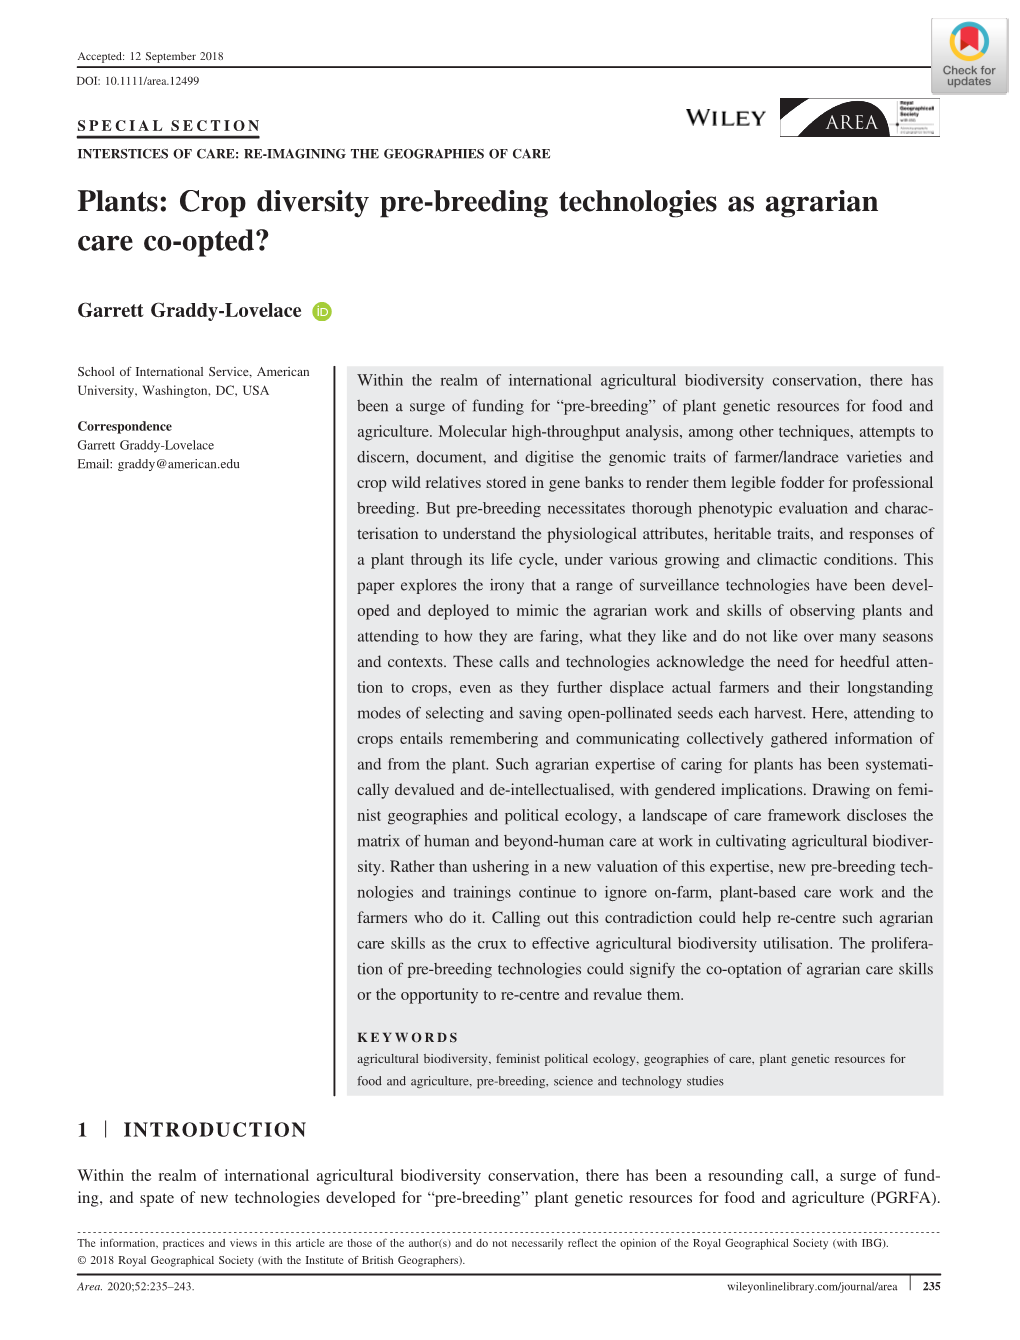 Plants: Crop Diversity Pre‐Breeding Technologies As Agrarian Care Co‐Opted?